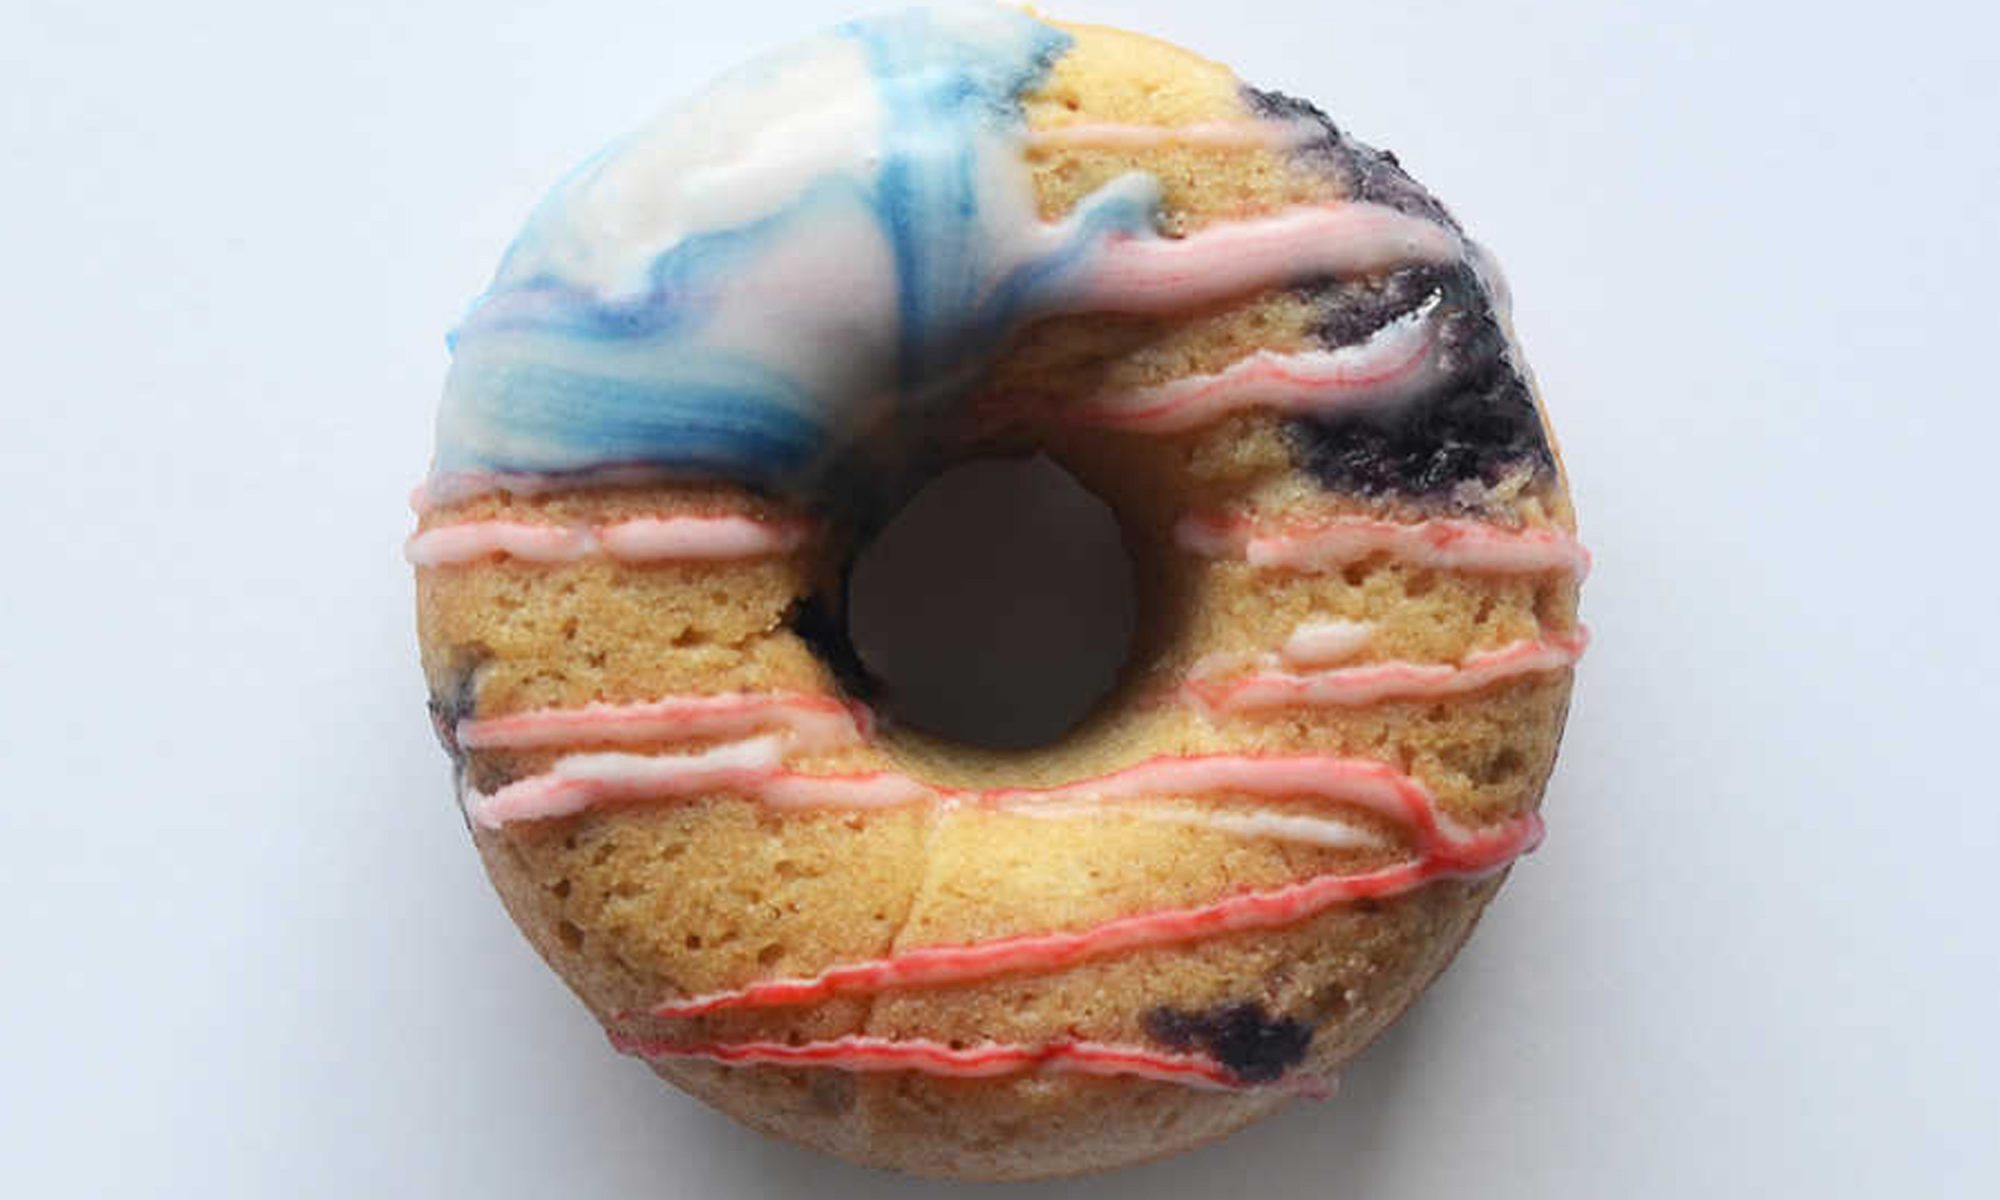 EC: Red, White, and Blueberry Doughnuts with Tie-Dye Glaze